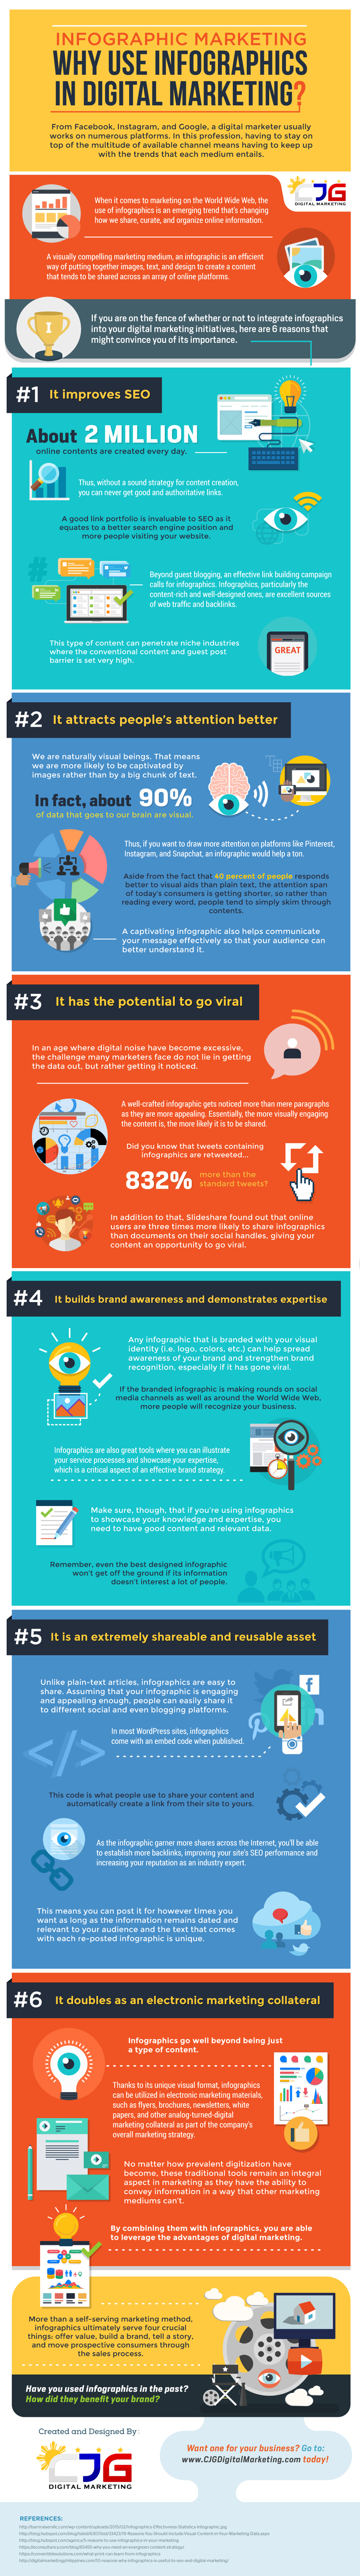 Infographic-Marketing-Why-Use-Infographics-in-Digital-Marketing